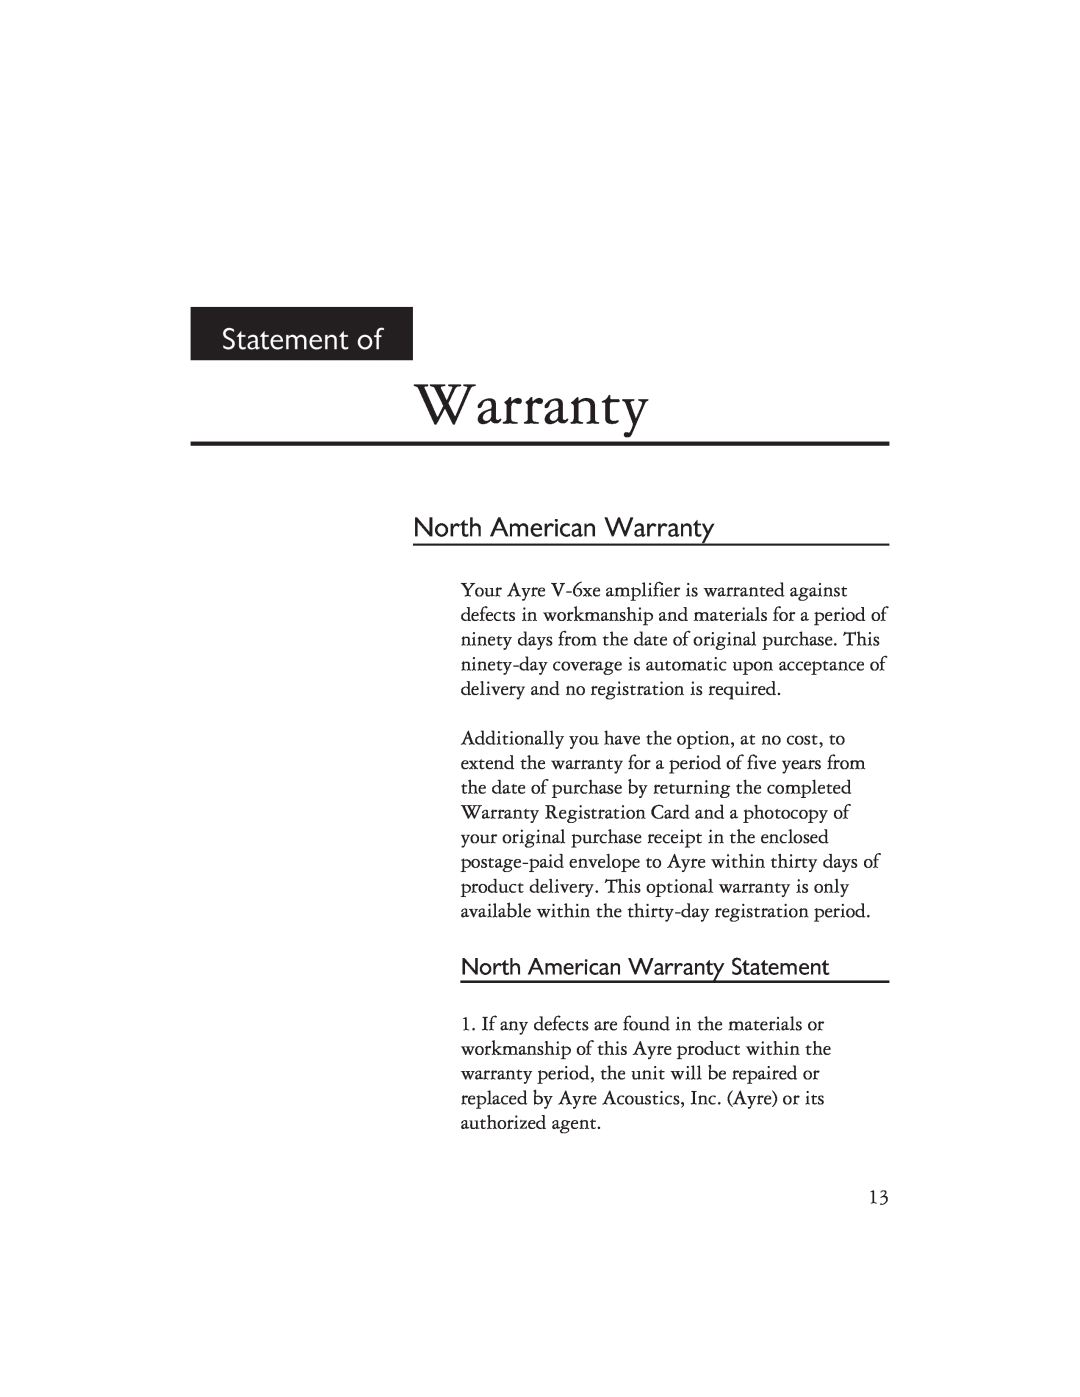 Ayre Acoustics Power Amplifier owner manual Statement of, North American Warranty Statement 